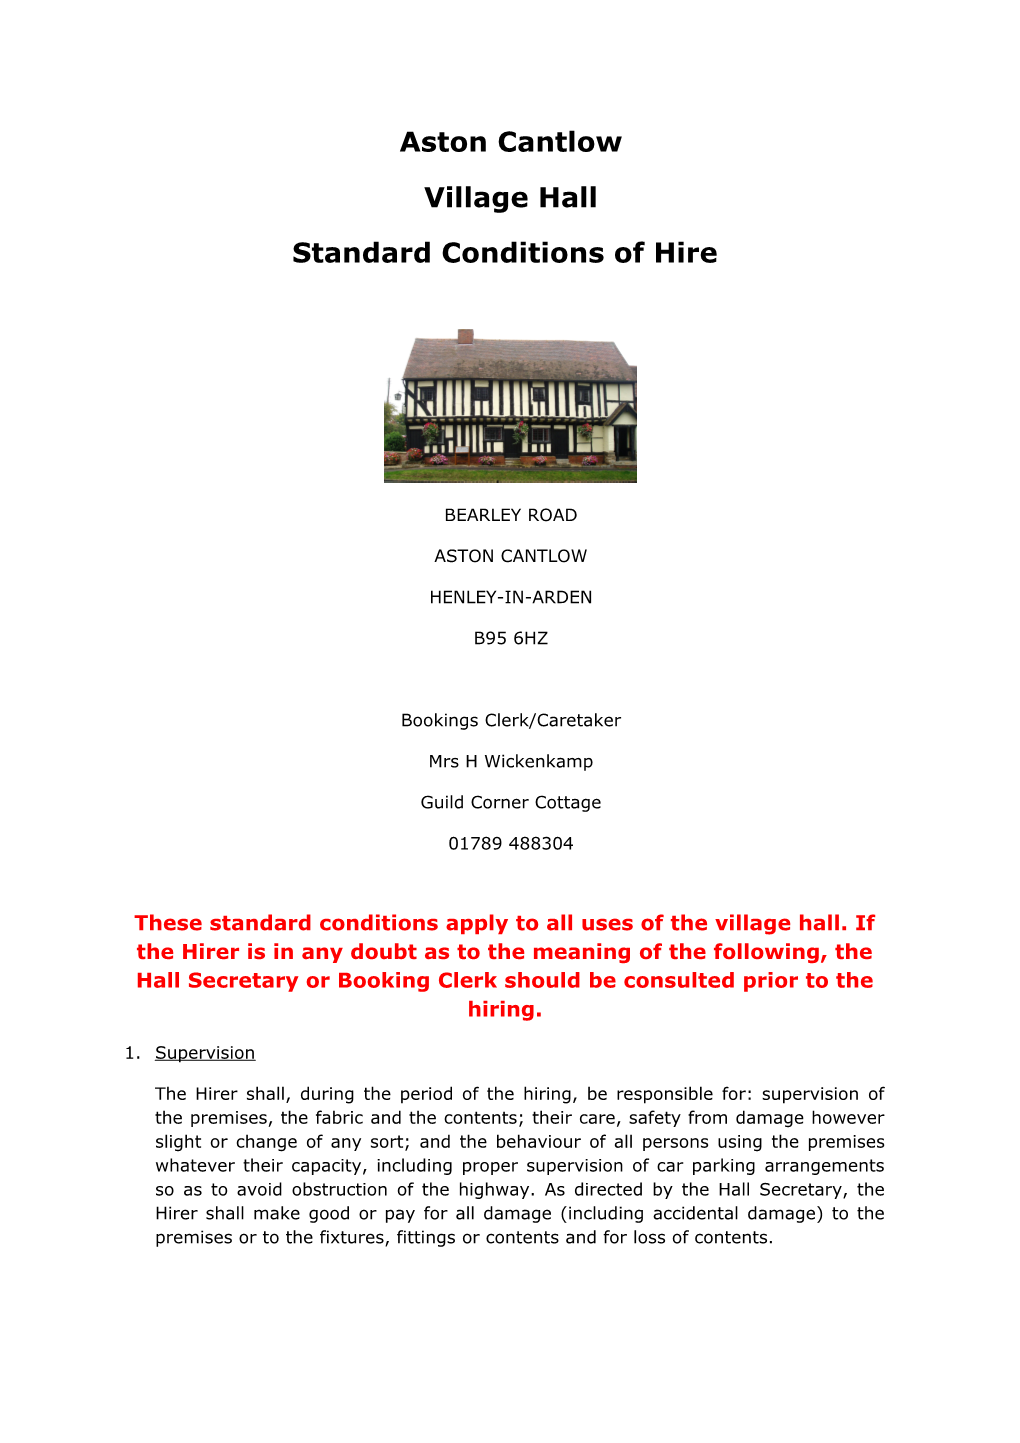 Standard Conditions of Hire